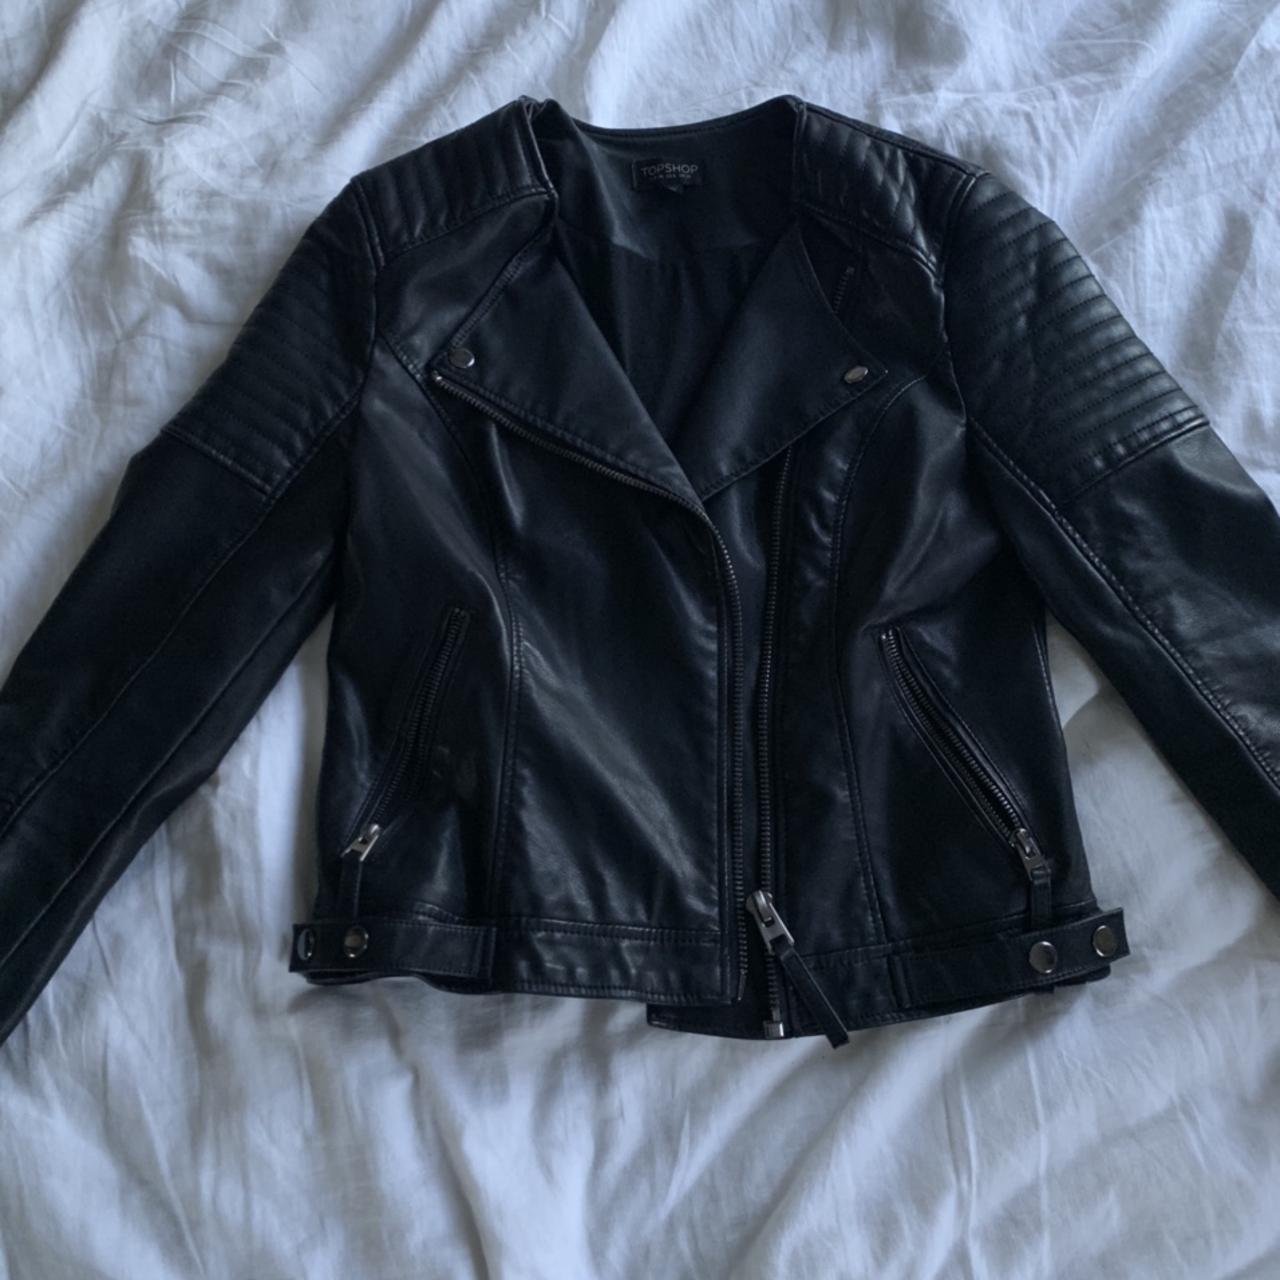 Topshop Faux Leather Biker Jacket - Shopping and Info